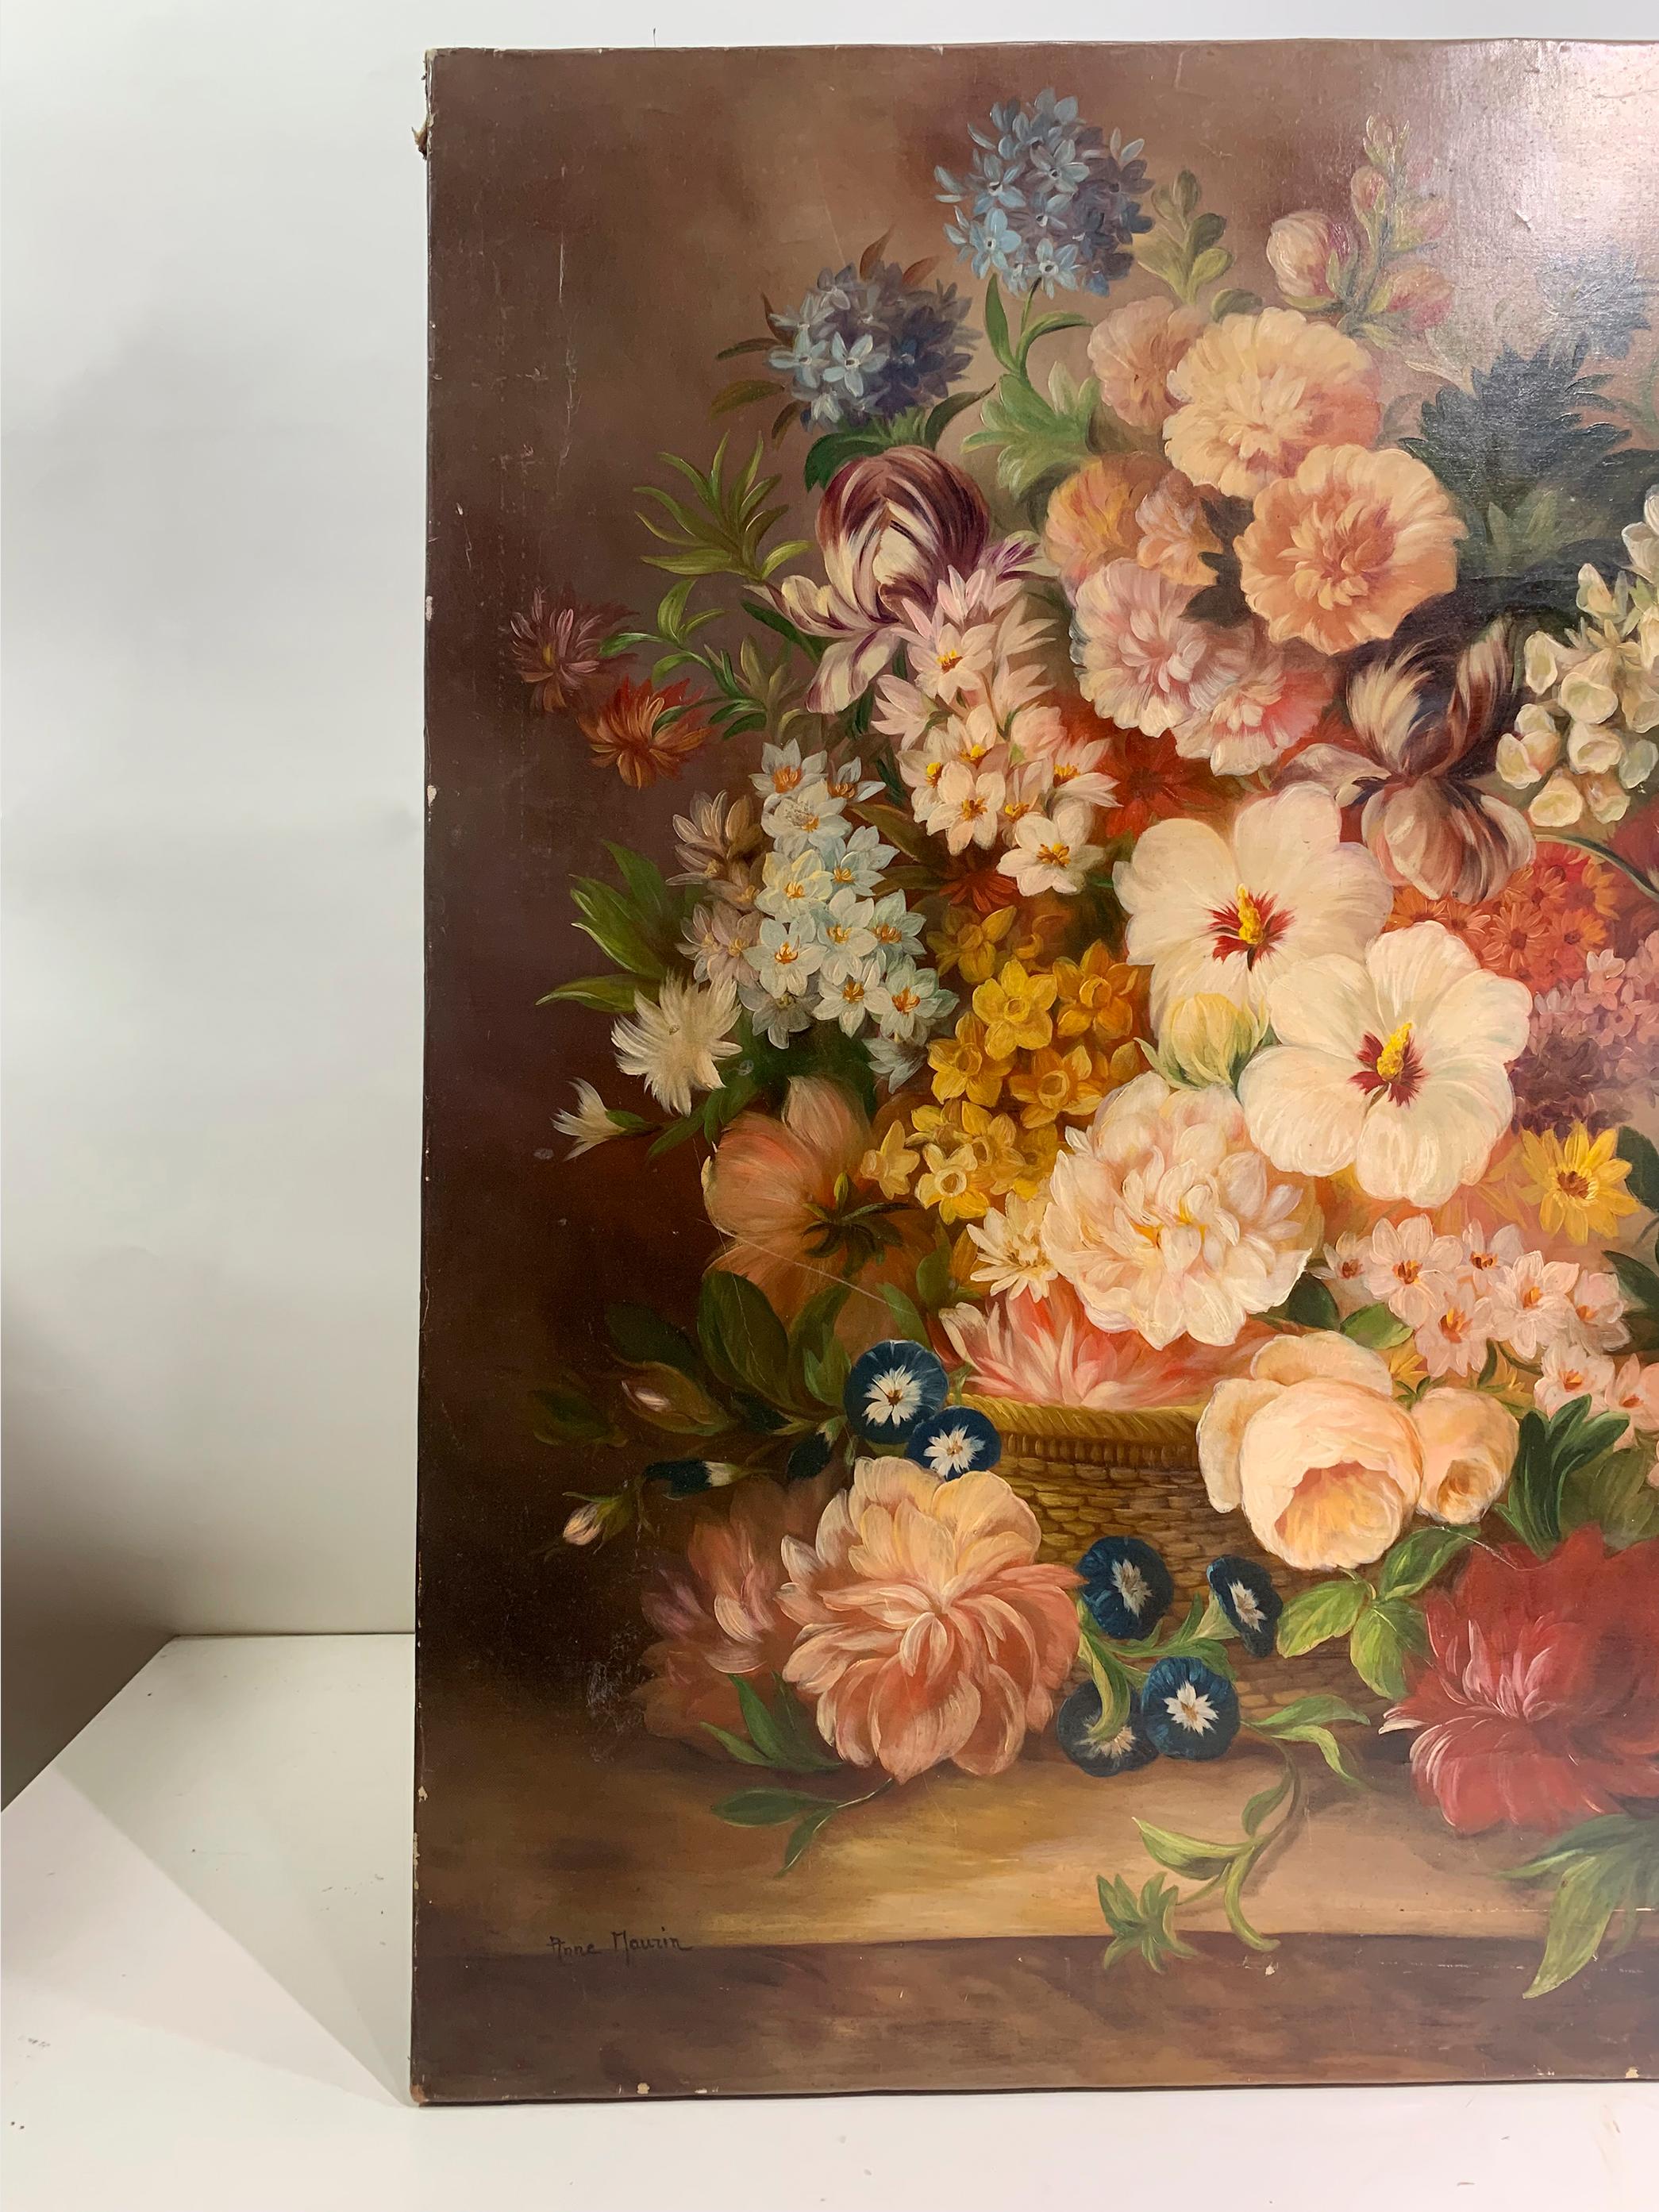 A floral painting, signed Anne Maurin at the bottom left corner, from the 19th century, typical of the period's Romantic and Realist styles, depicting a lush bouquet of flowers arranged in a basket. 
The painting features a variety of blooms such as